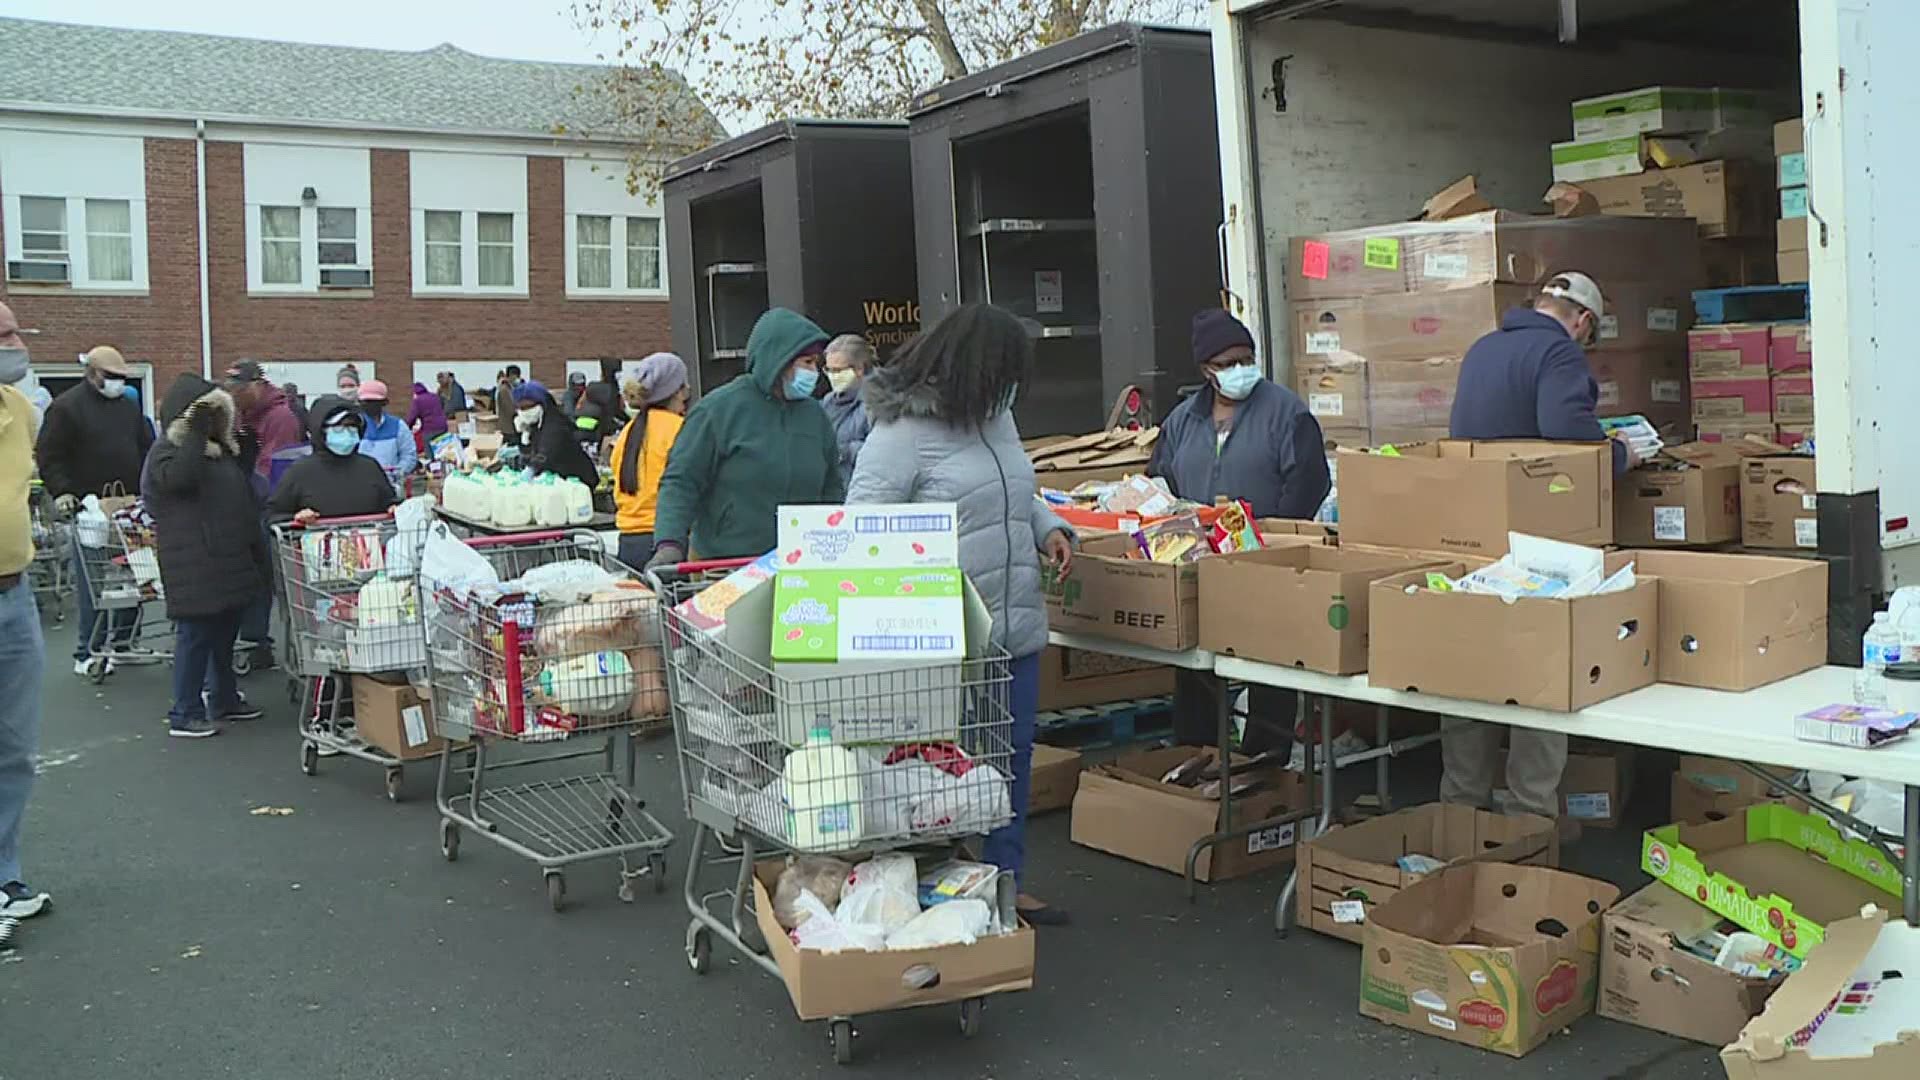 The Saturday morning food pantry estimates that around 1,500 people took a cartful of food.